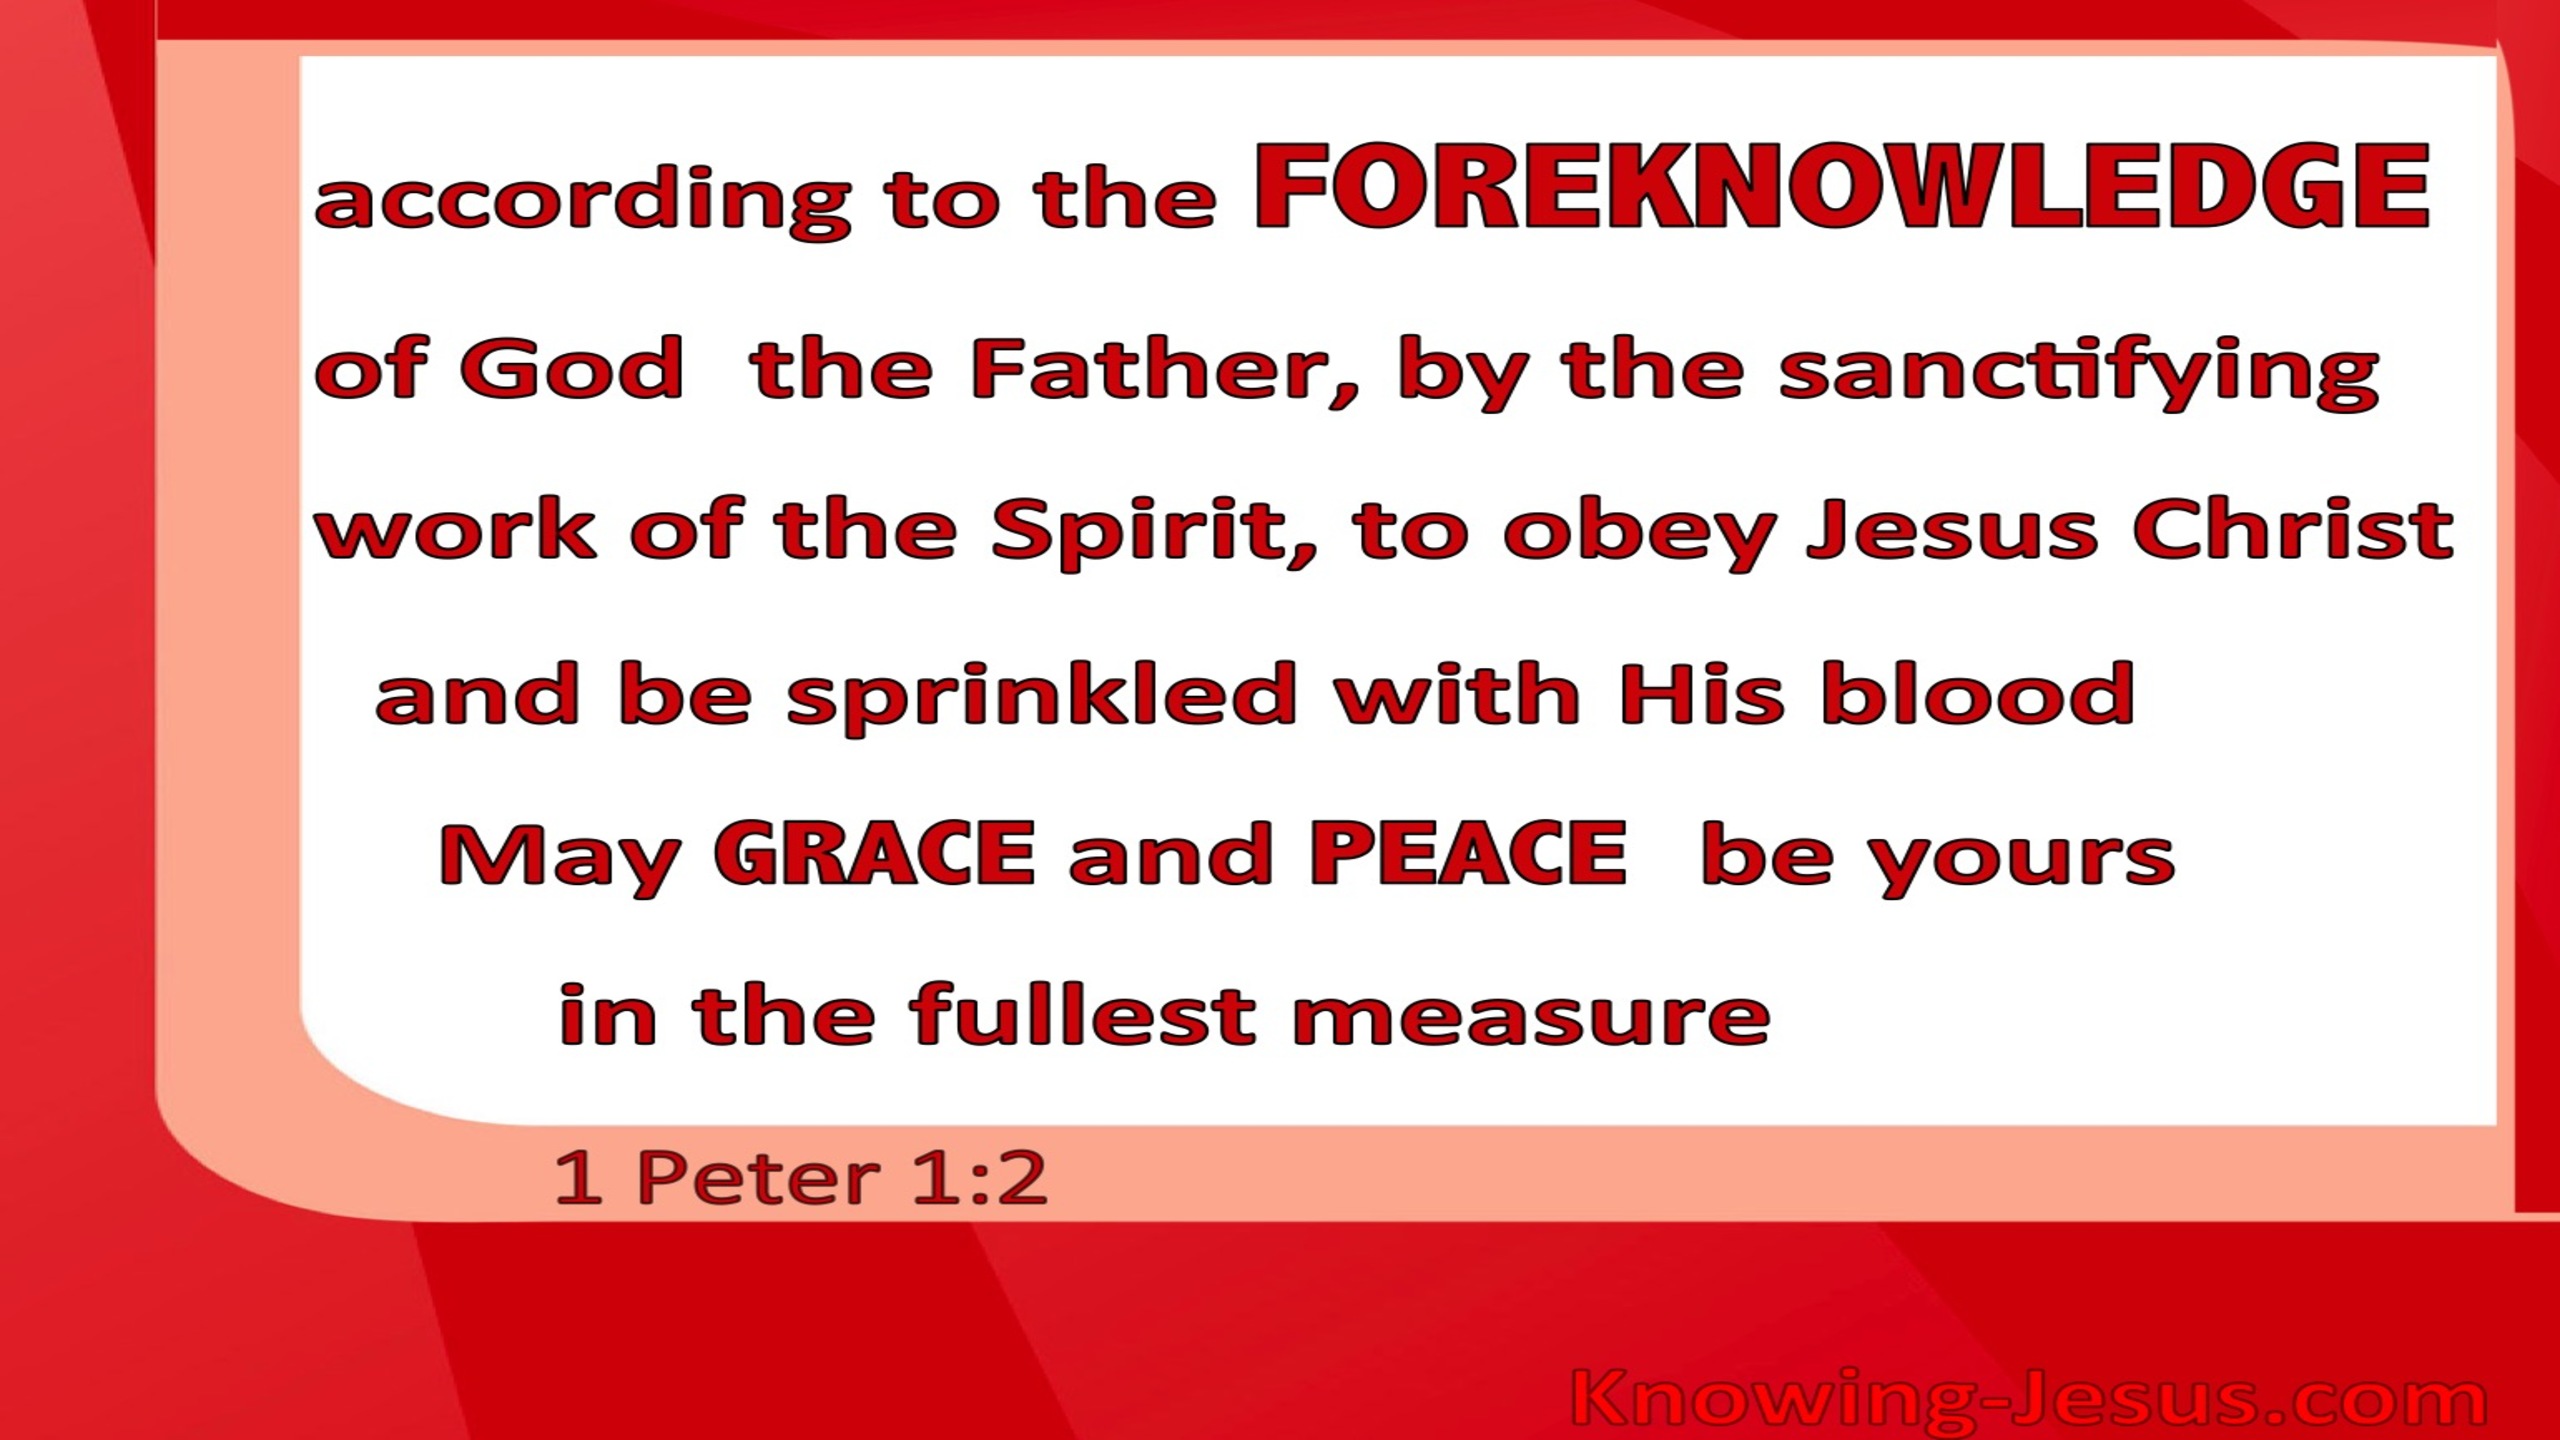 1 Peter 1:2 Elect According To the Foreknowledge of God (red)